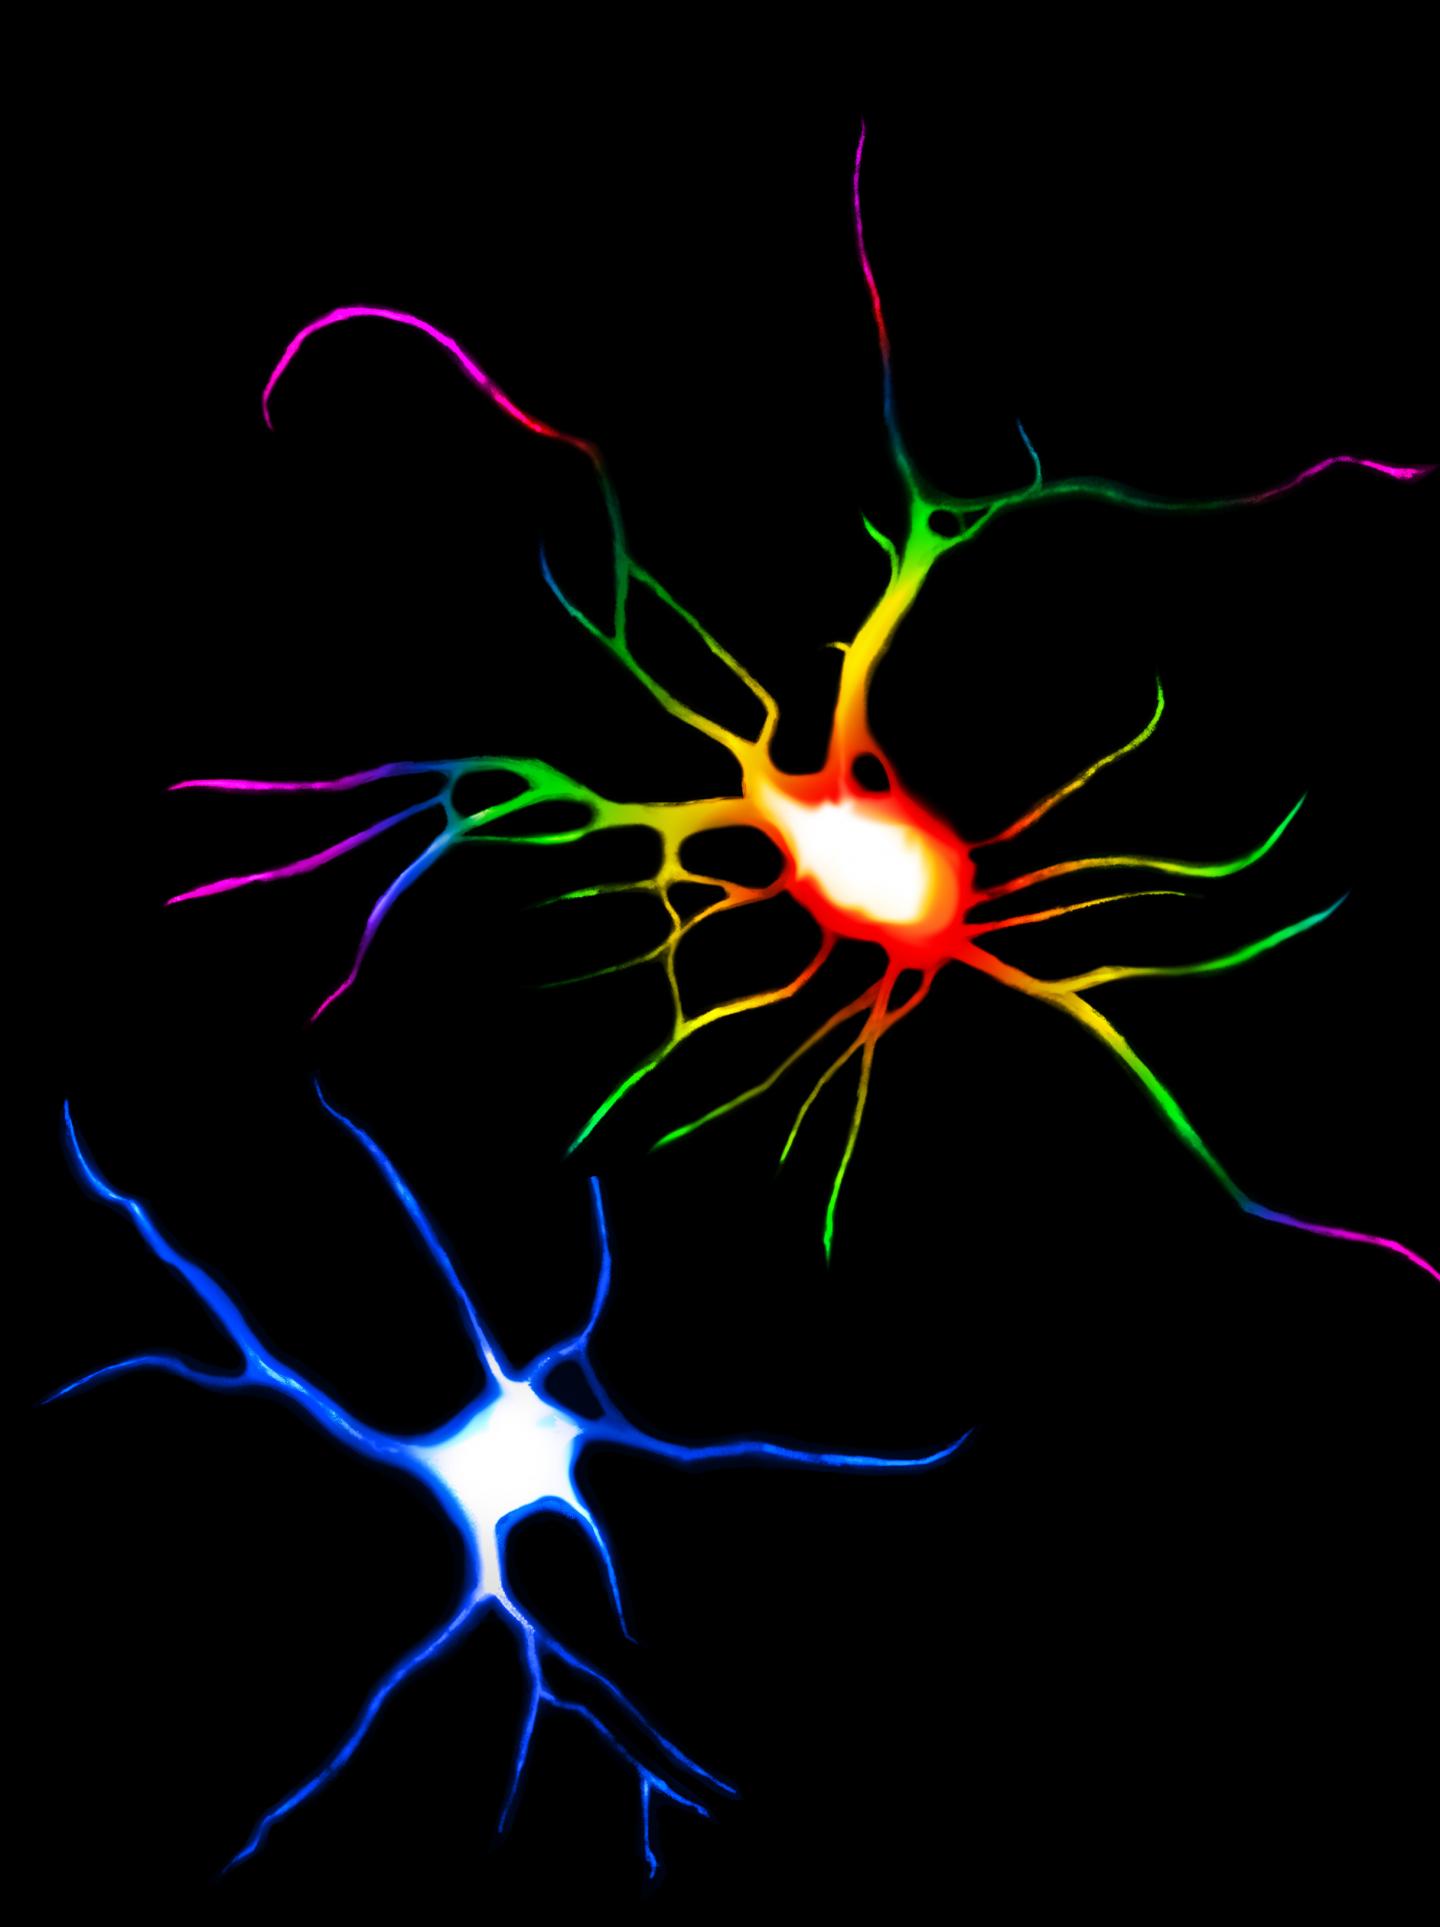 Psychedelic Drugs, Ketamine Change Structure of Neurons